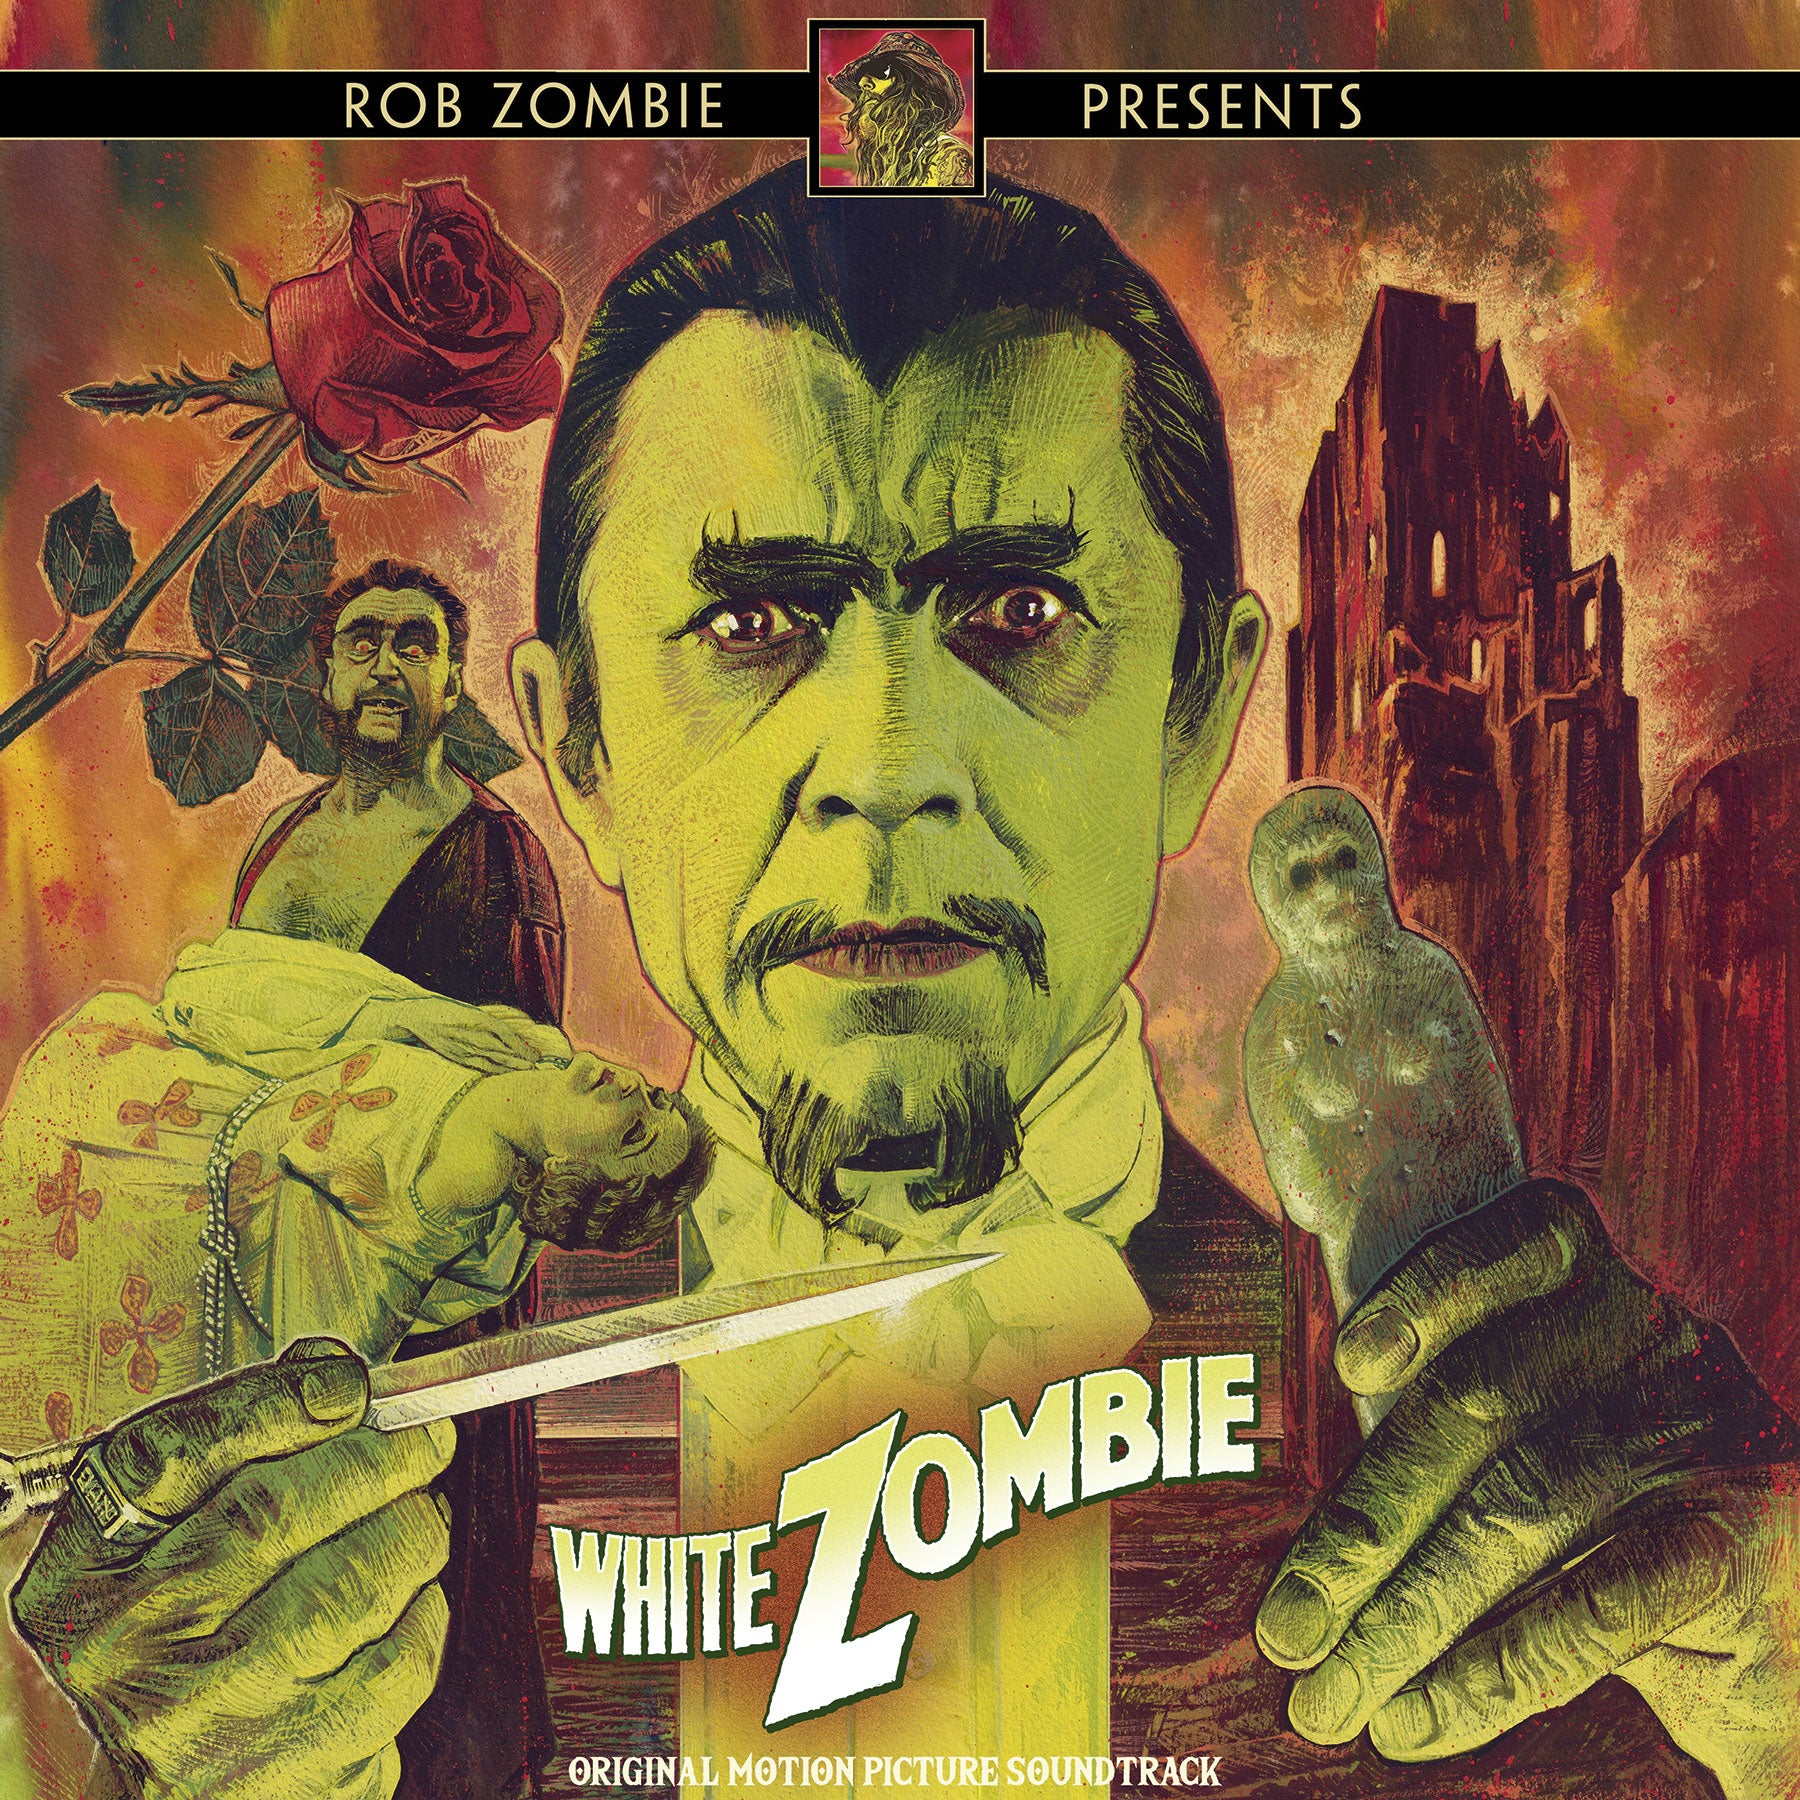 ZOMBIES – Cast: albums, songs, playlists